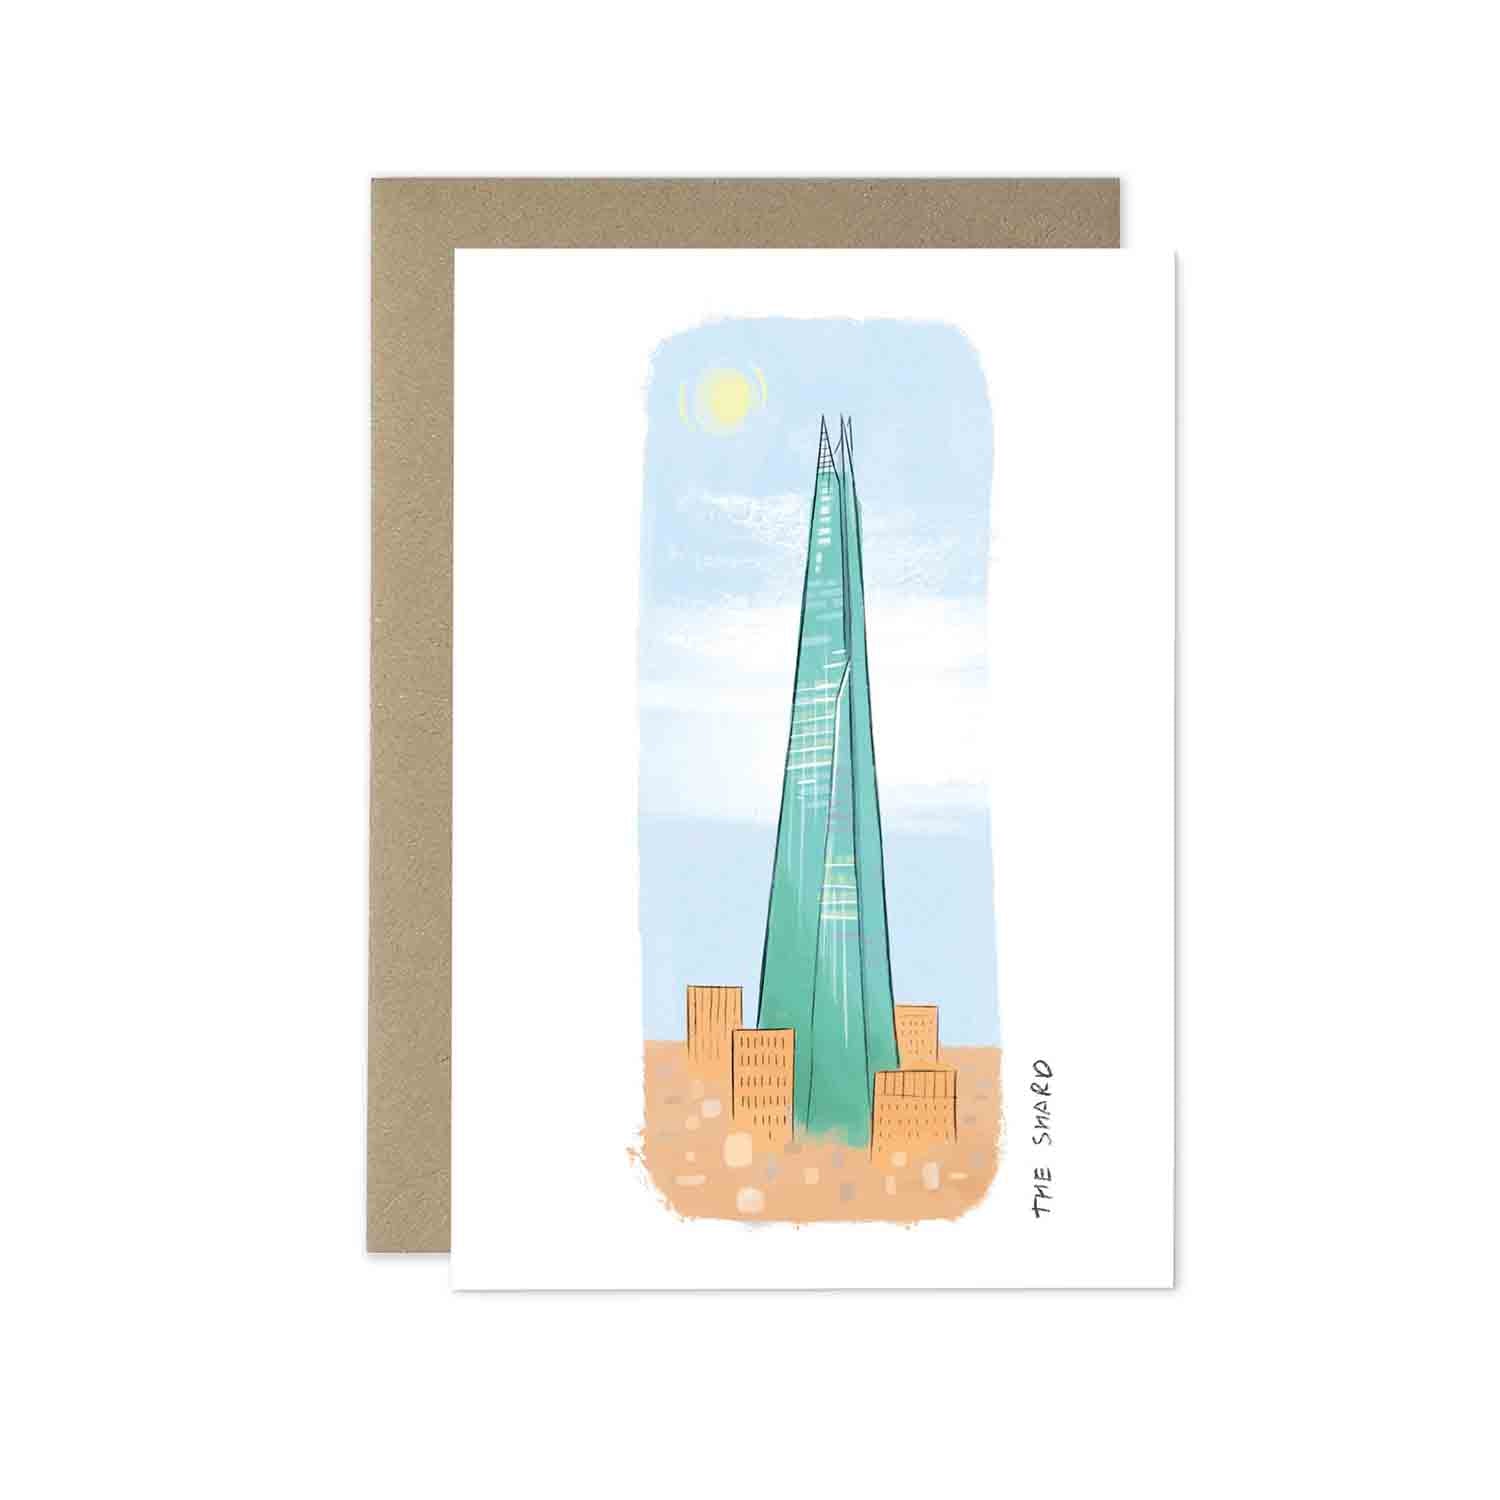 London's The Shard beautifully illustrated on a greeting card from mike green illustration.